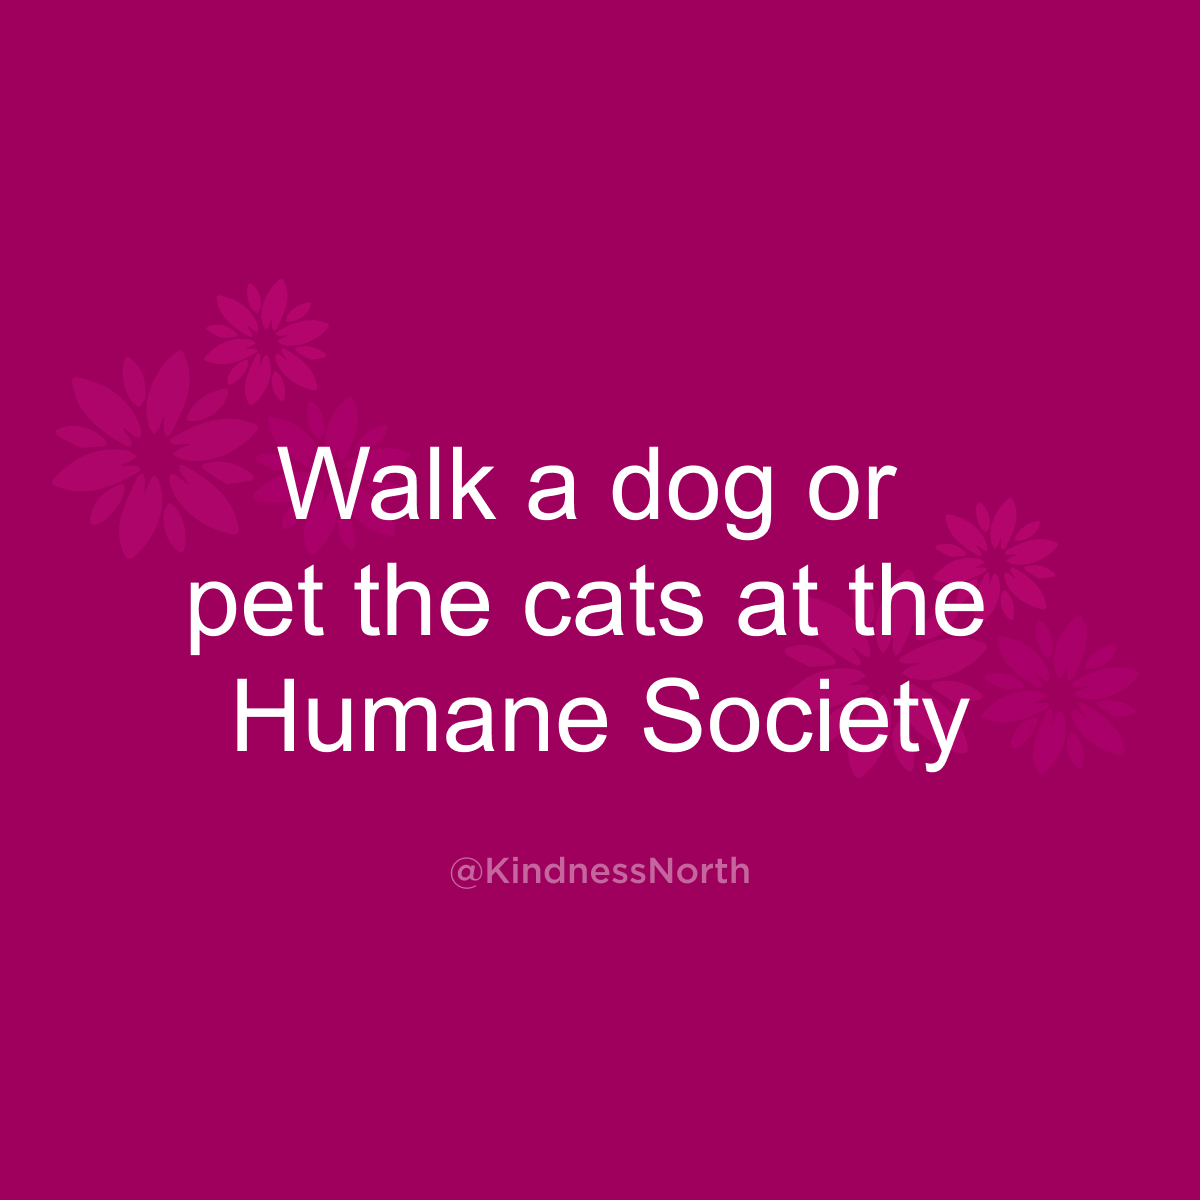 Walk a dog or pet the cats at the Humane Society